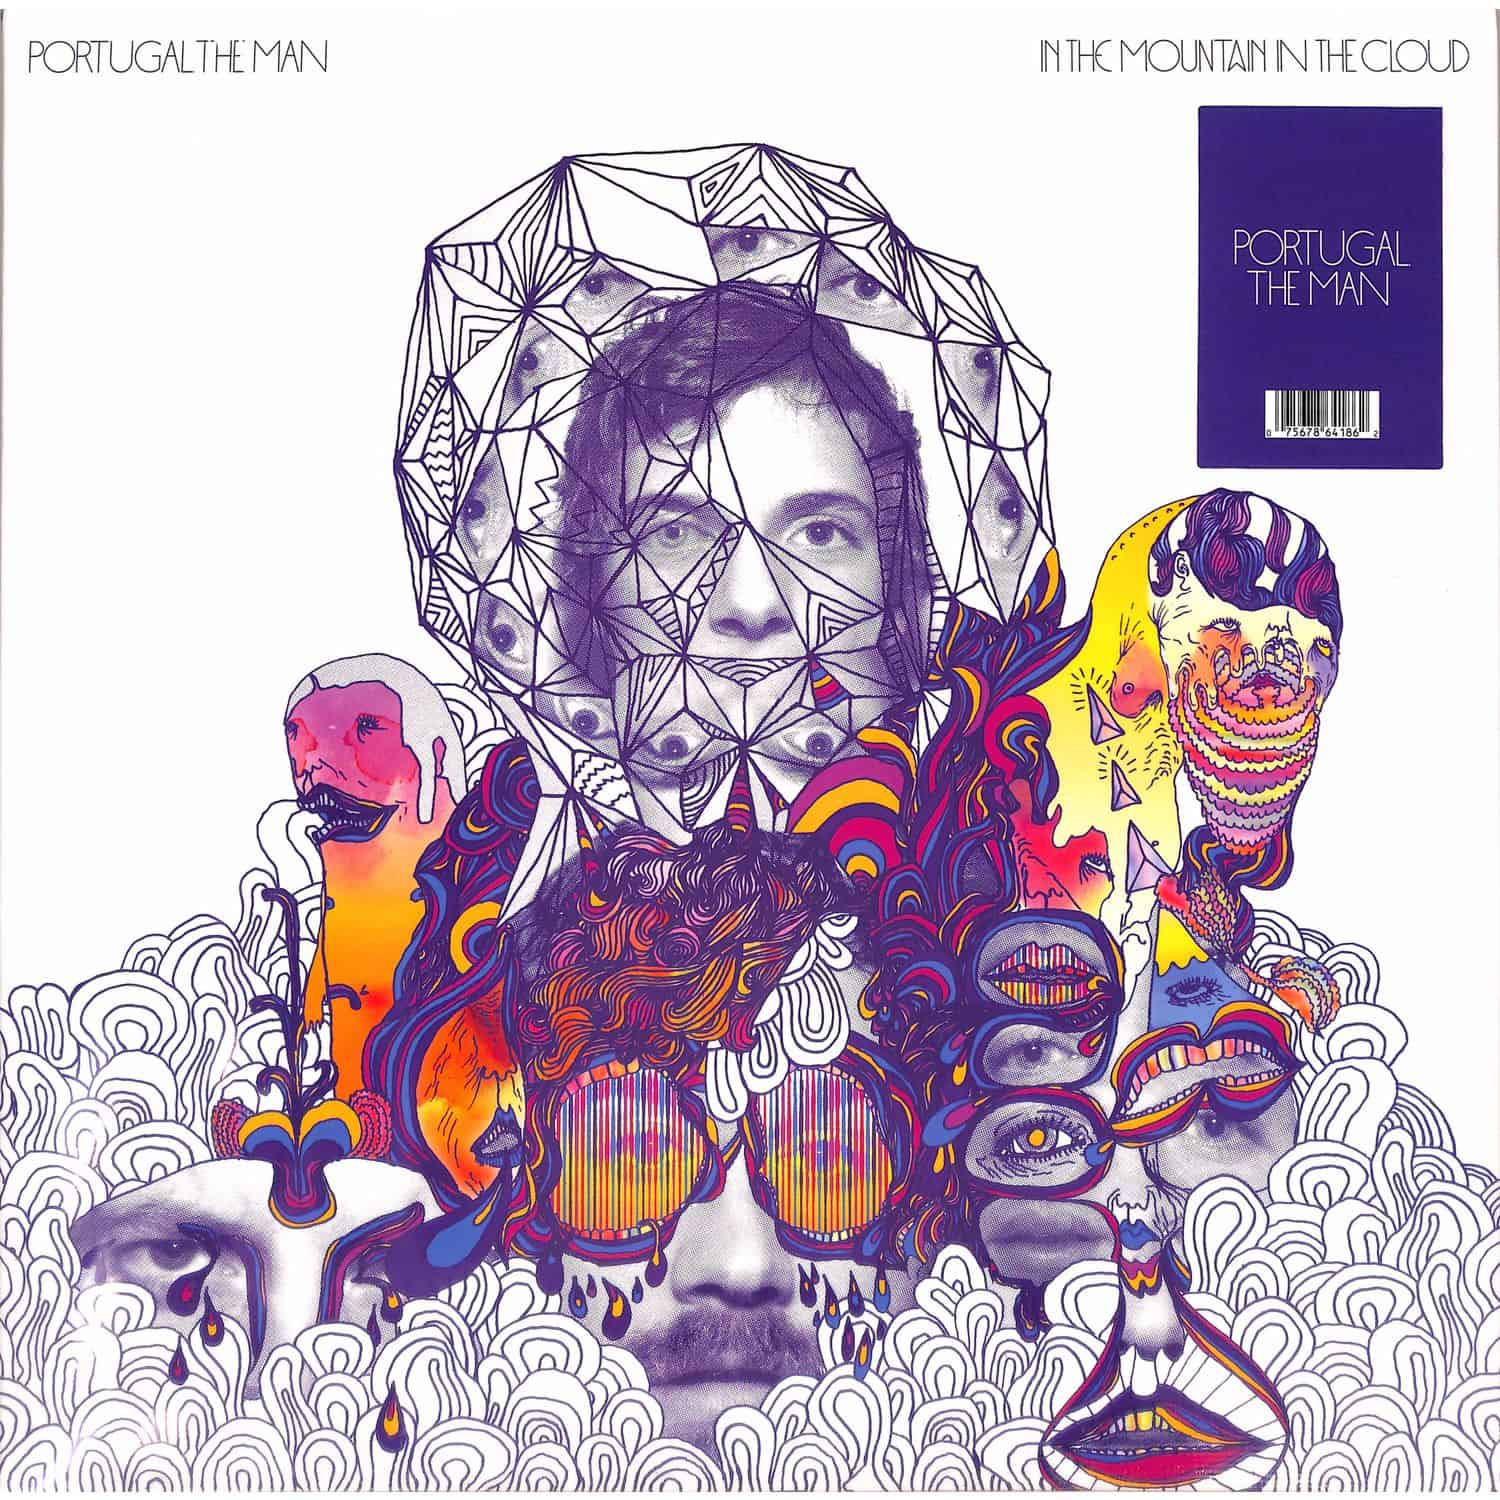 Portugal.The Man - IN THE MOUNTAIN IN THE CLOUD 